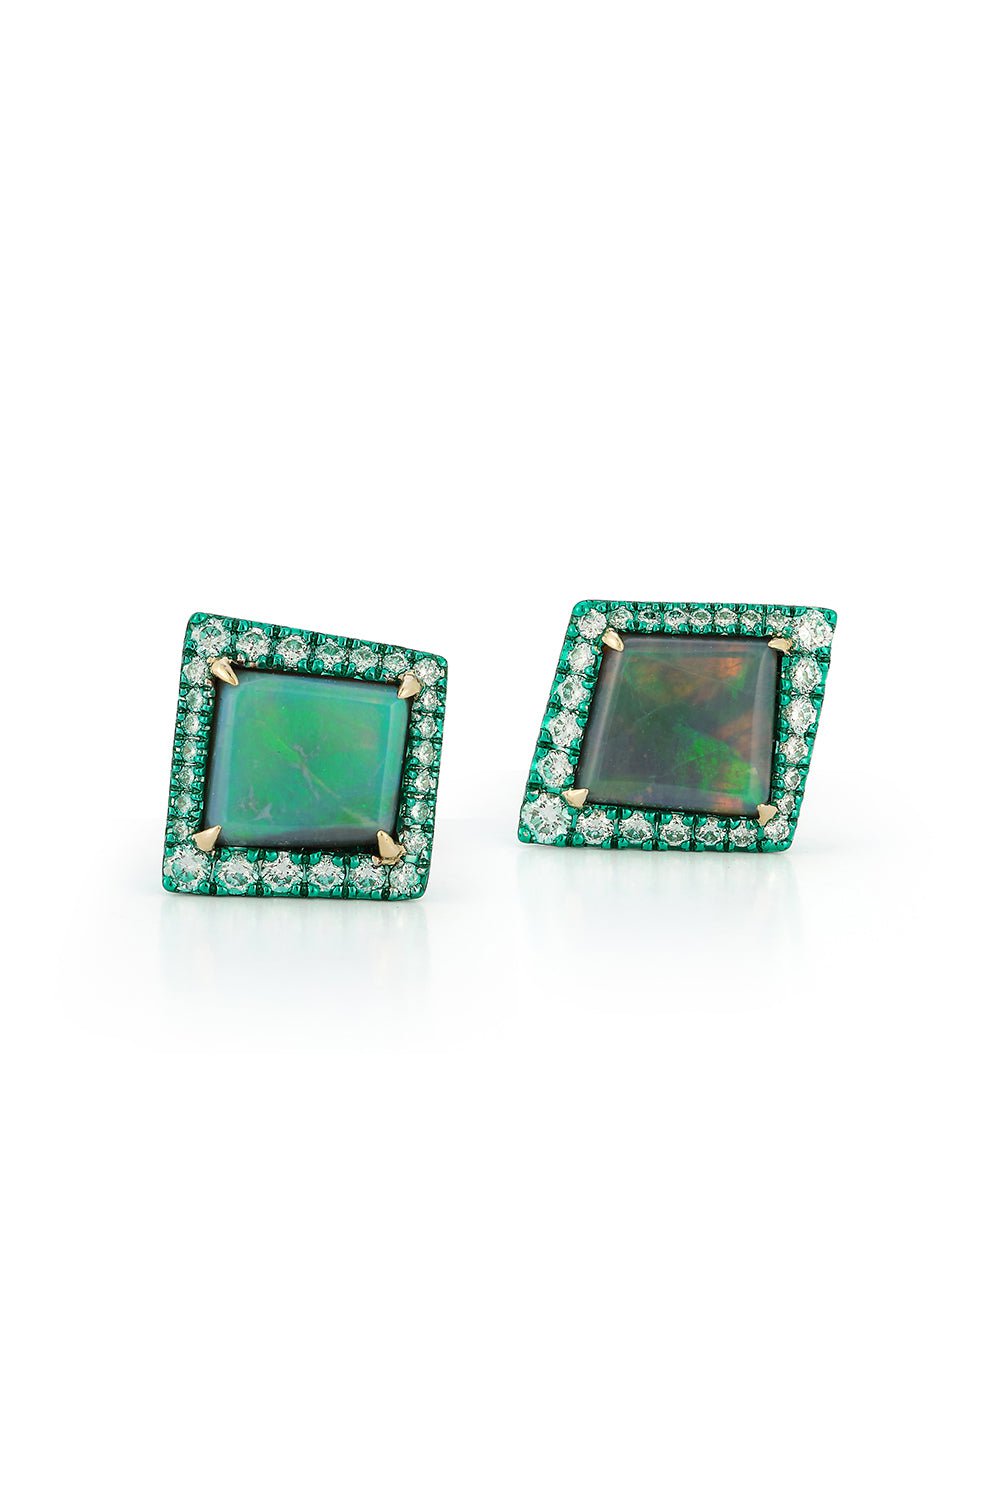 KATHERINE JETTER-Square Opal Stud Earrings-YELLOW GOLD